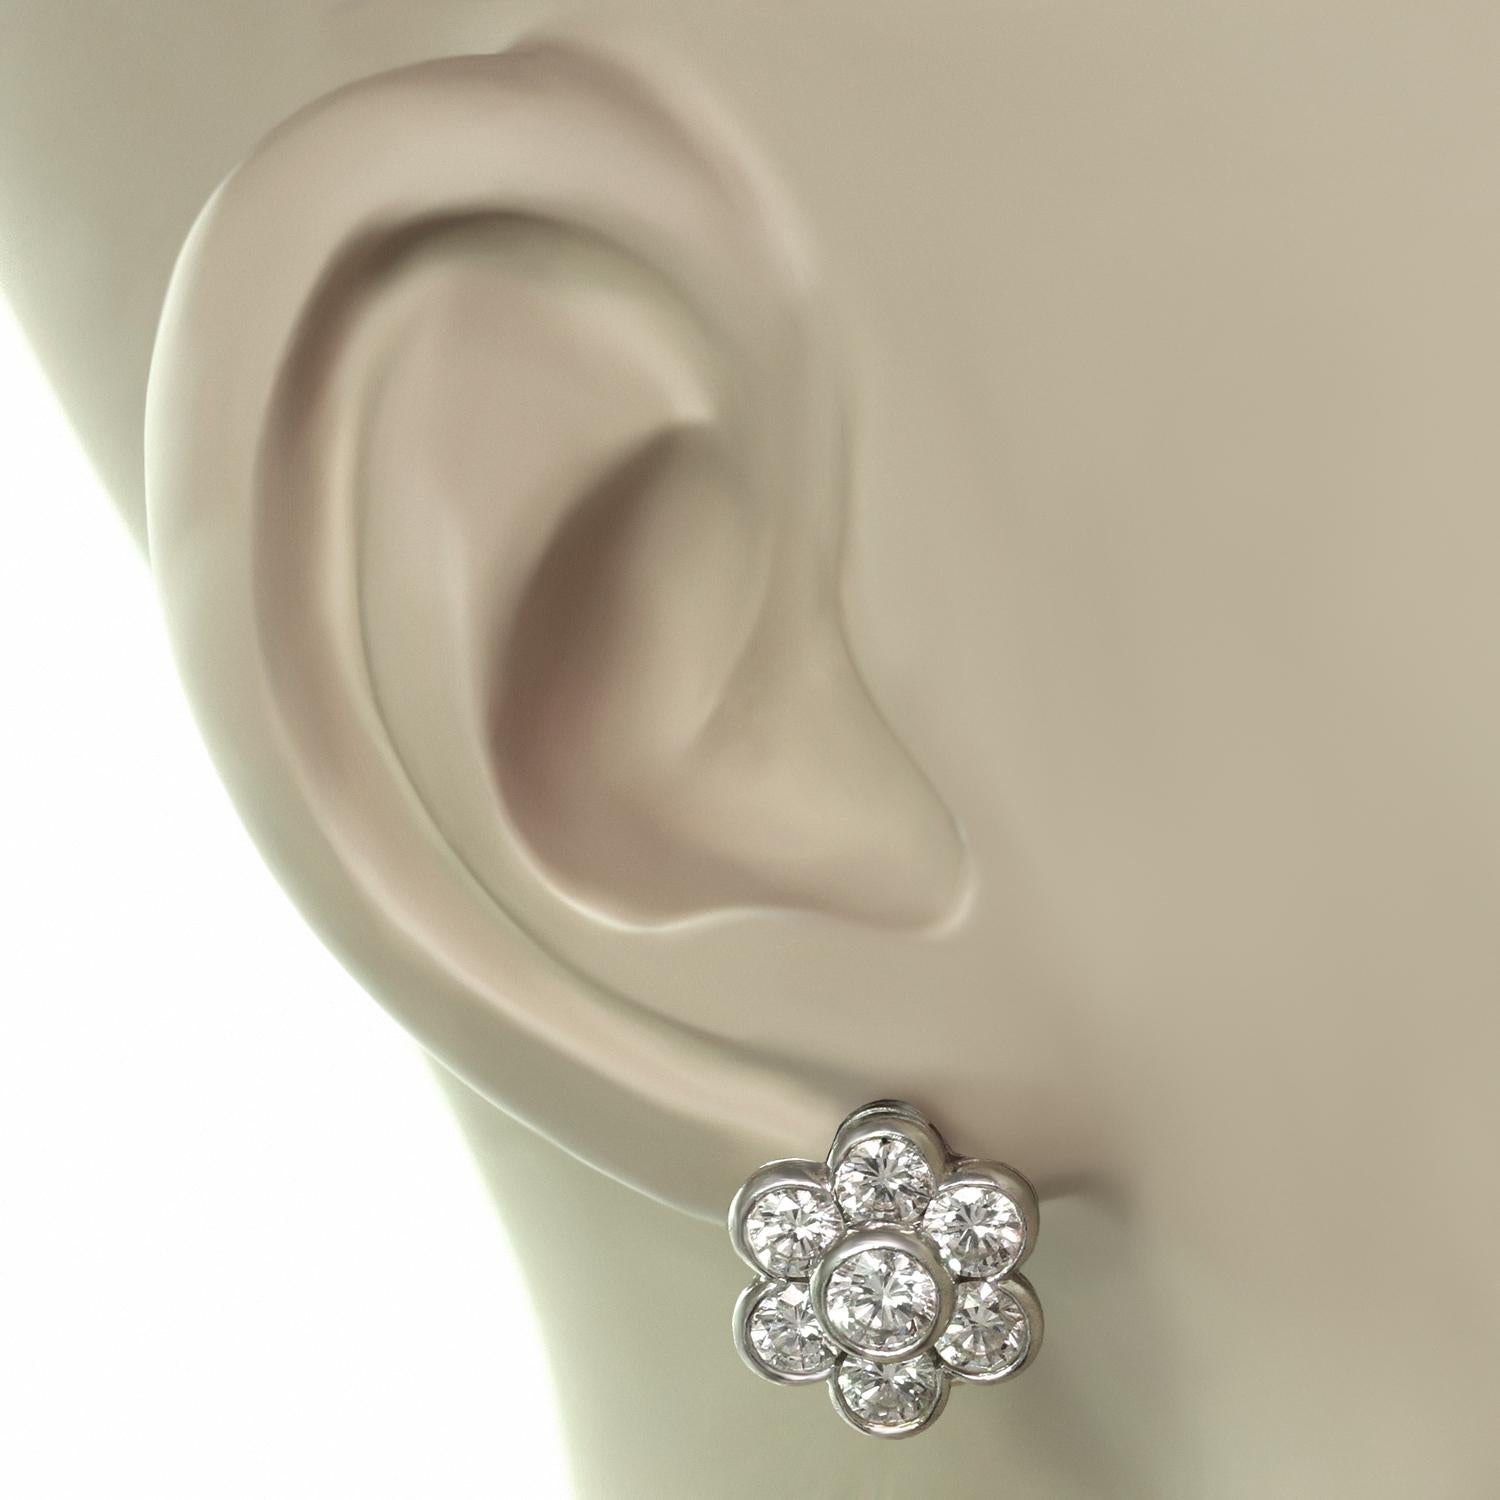 These beautiful Van Cleef & Arpels earrings feature a six petal design crafted in platinum and bezel-set with brilliant-cut round E-F-G VVS1-VVS2 diamonds - the two center diamonds weigh an estimated 0.50 carats and the 12 surrounding diamonds weigh